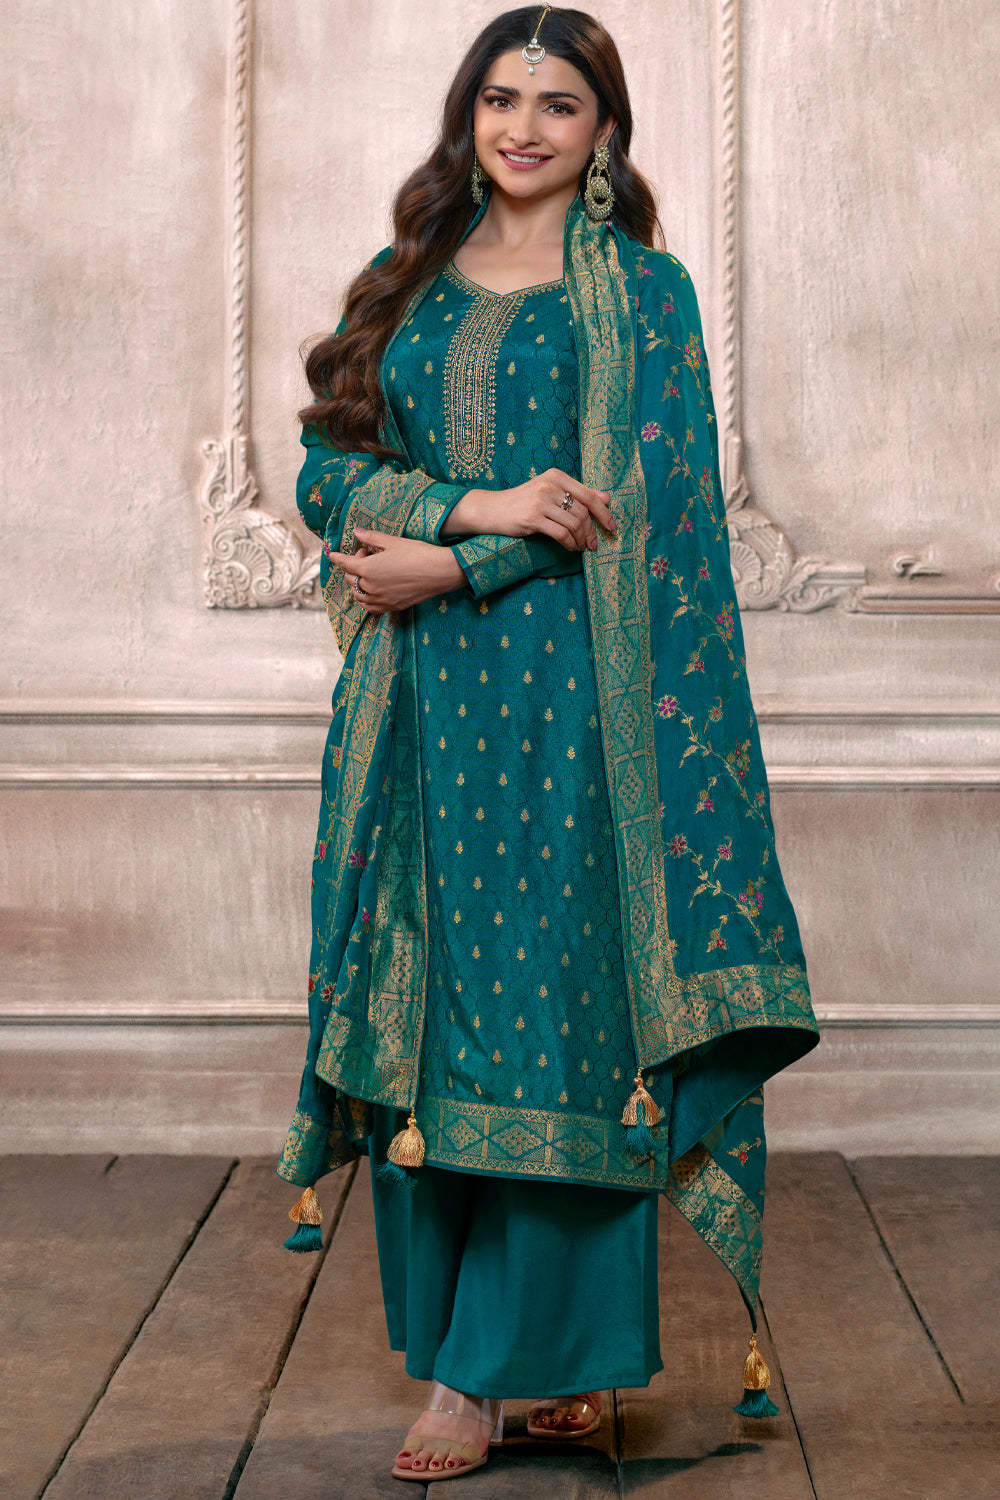 Teal Color Silk Woven Unstitched Suit Material